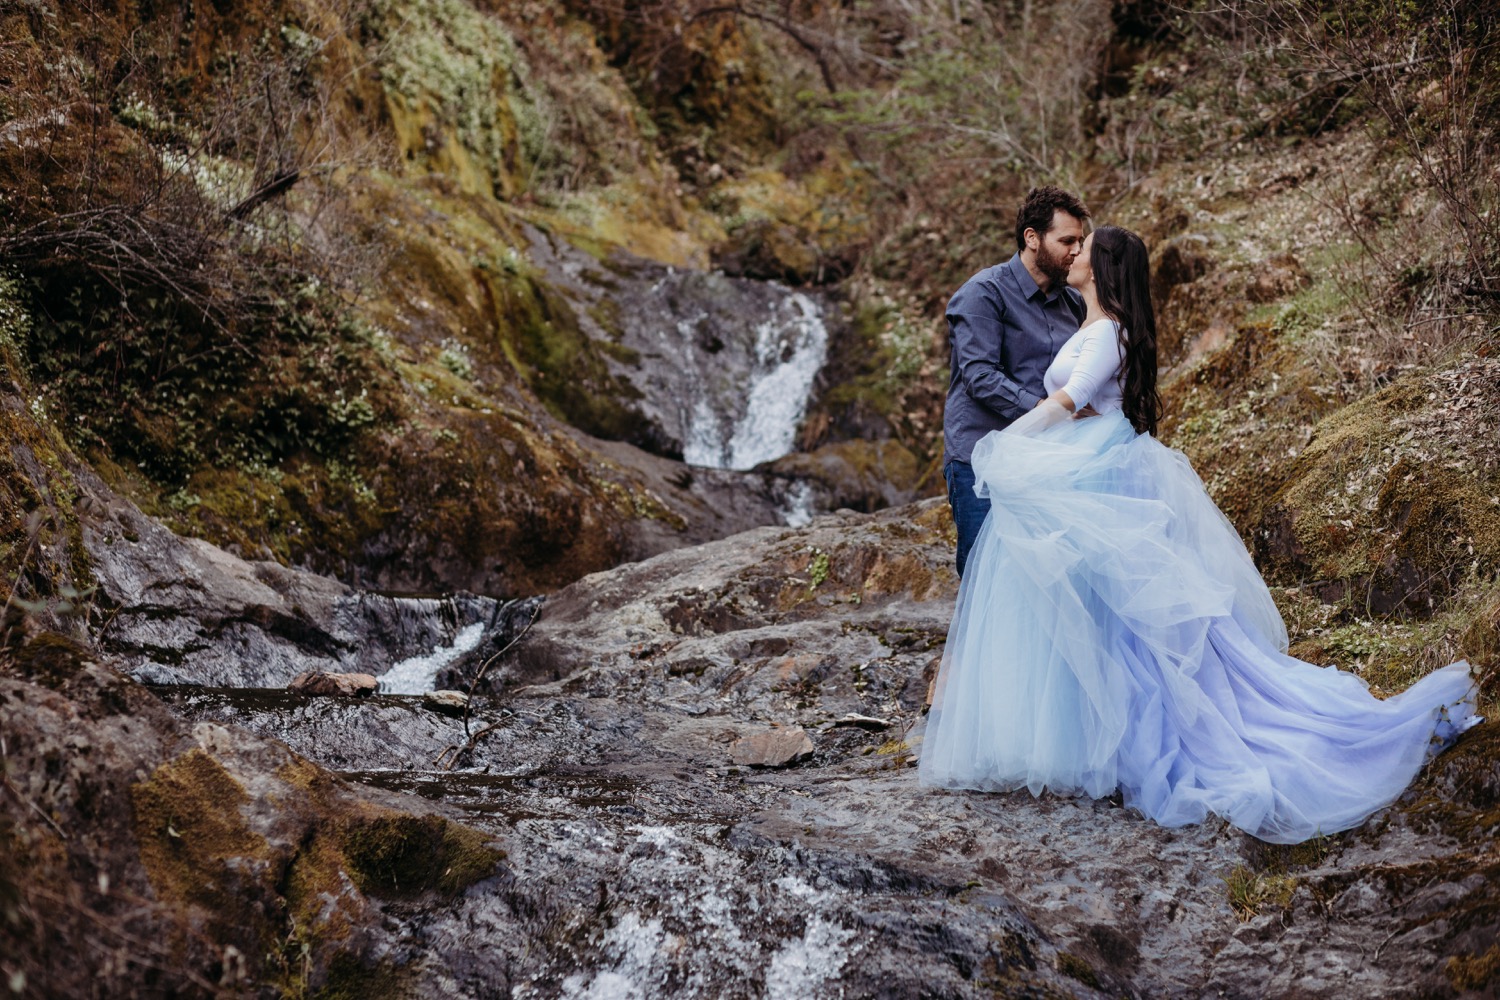 Couple kisses alongside a waterfall as the woman twirls her light blue tulle skirt.